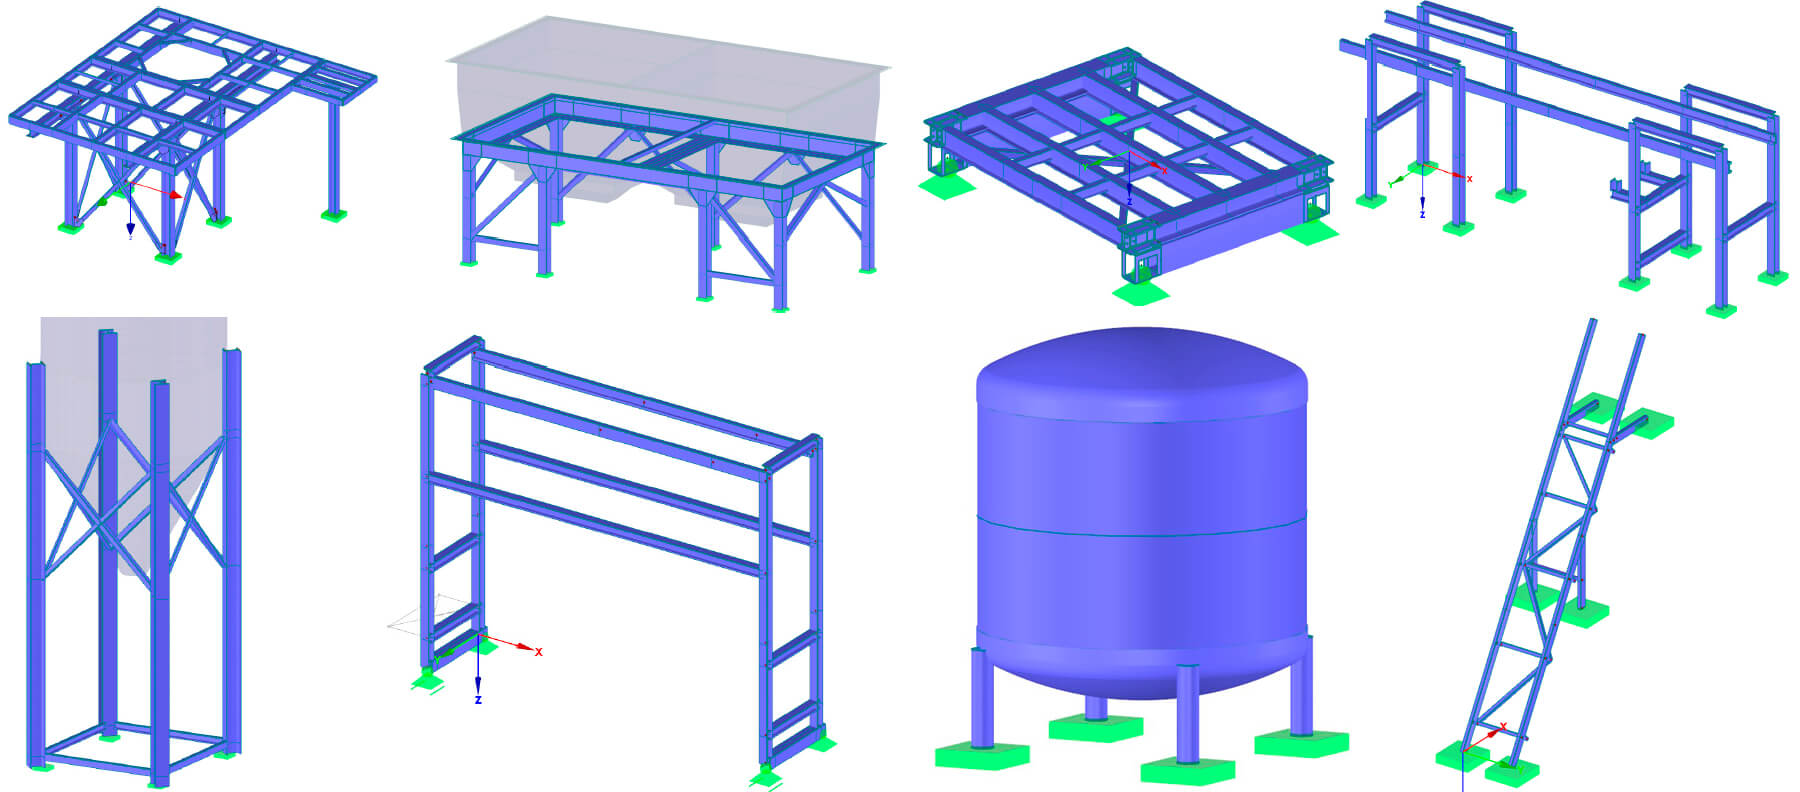 Supporting Structures for Oil Refinery